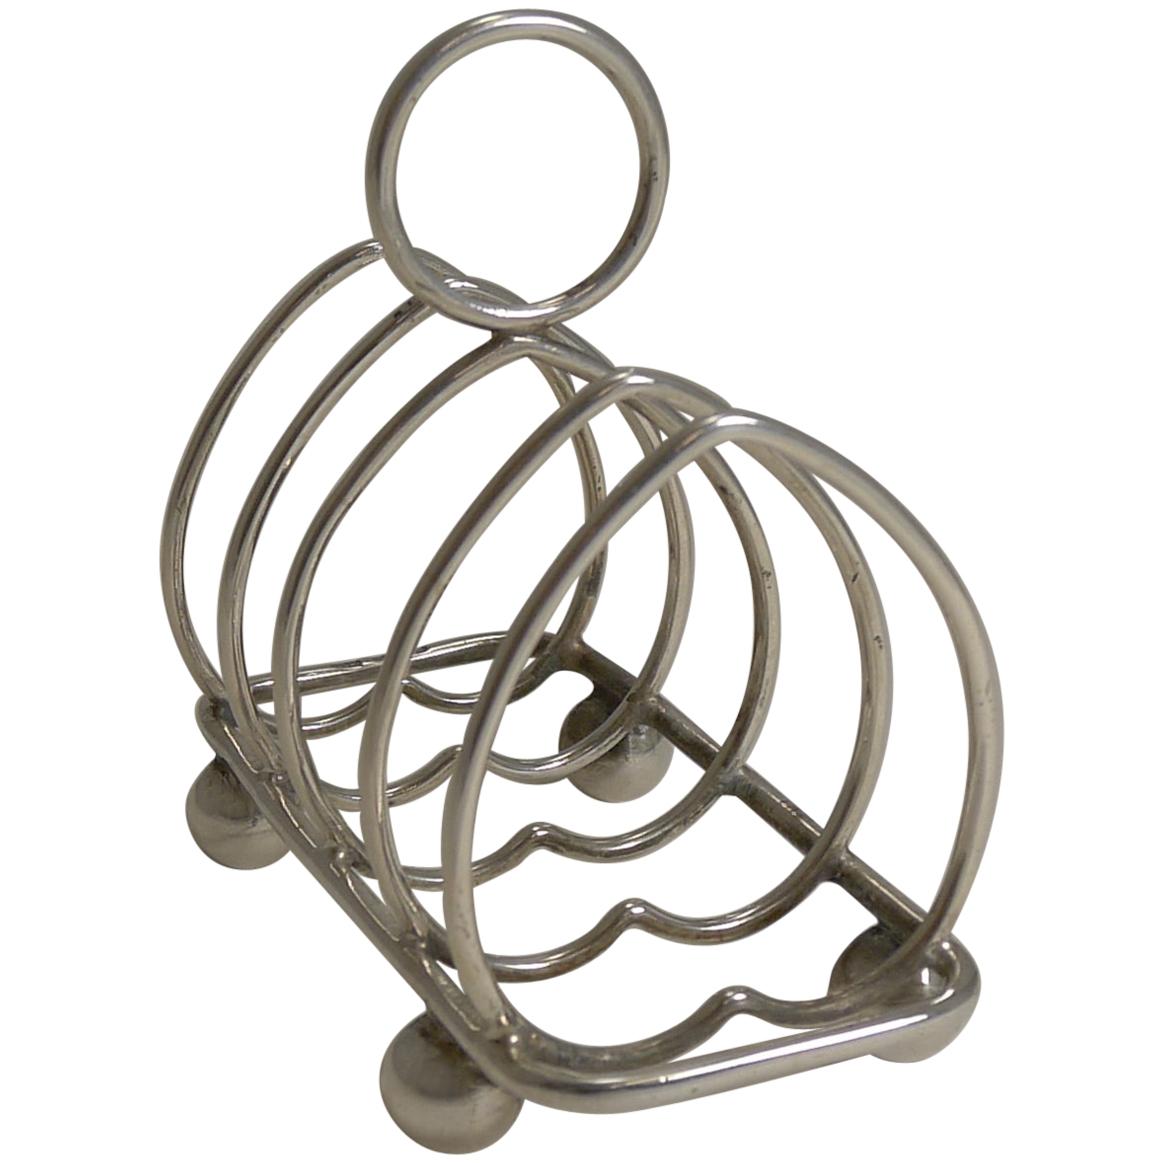 Antique English Sterling Silver Heart Toast Rack, 1912 by Walker and Hall